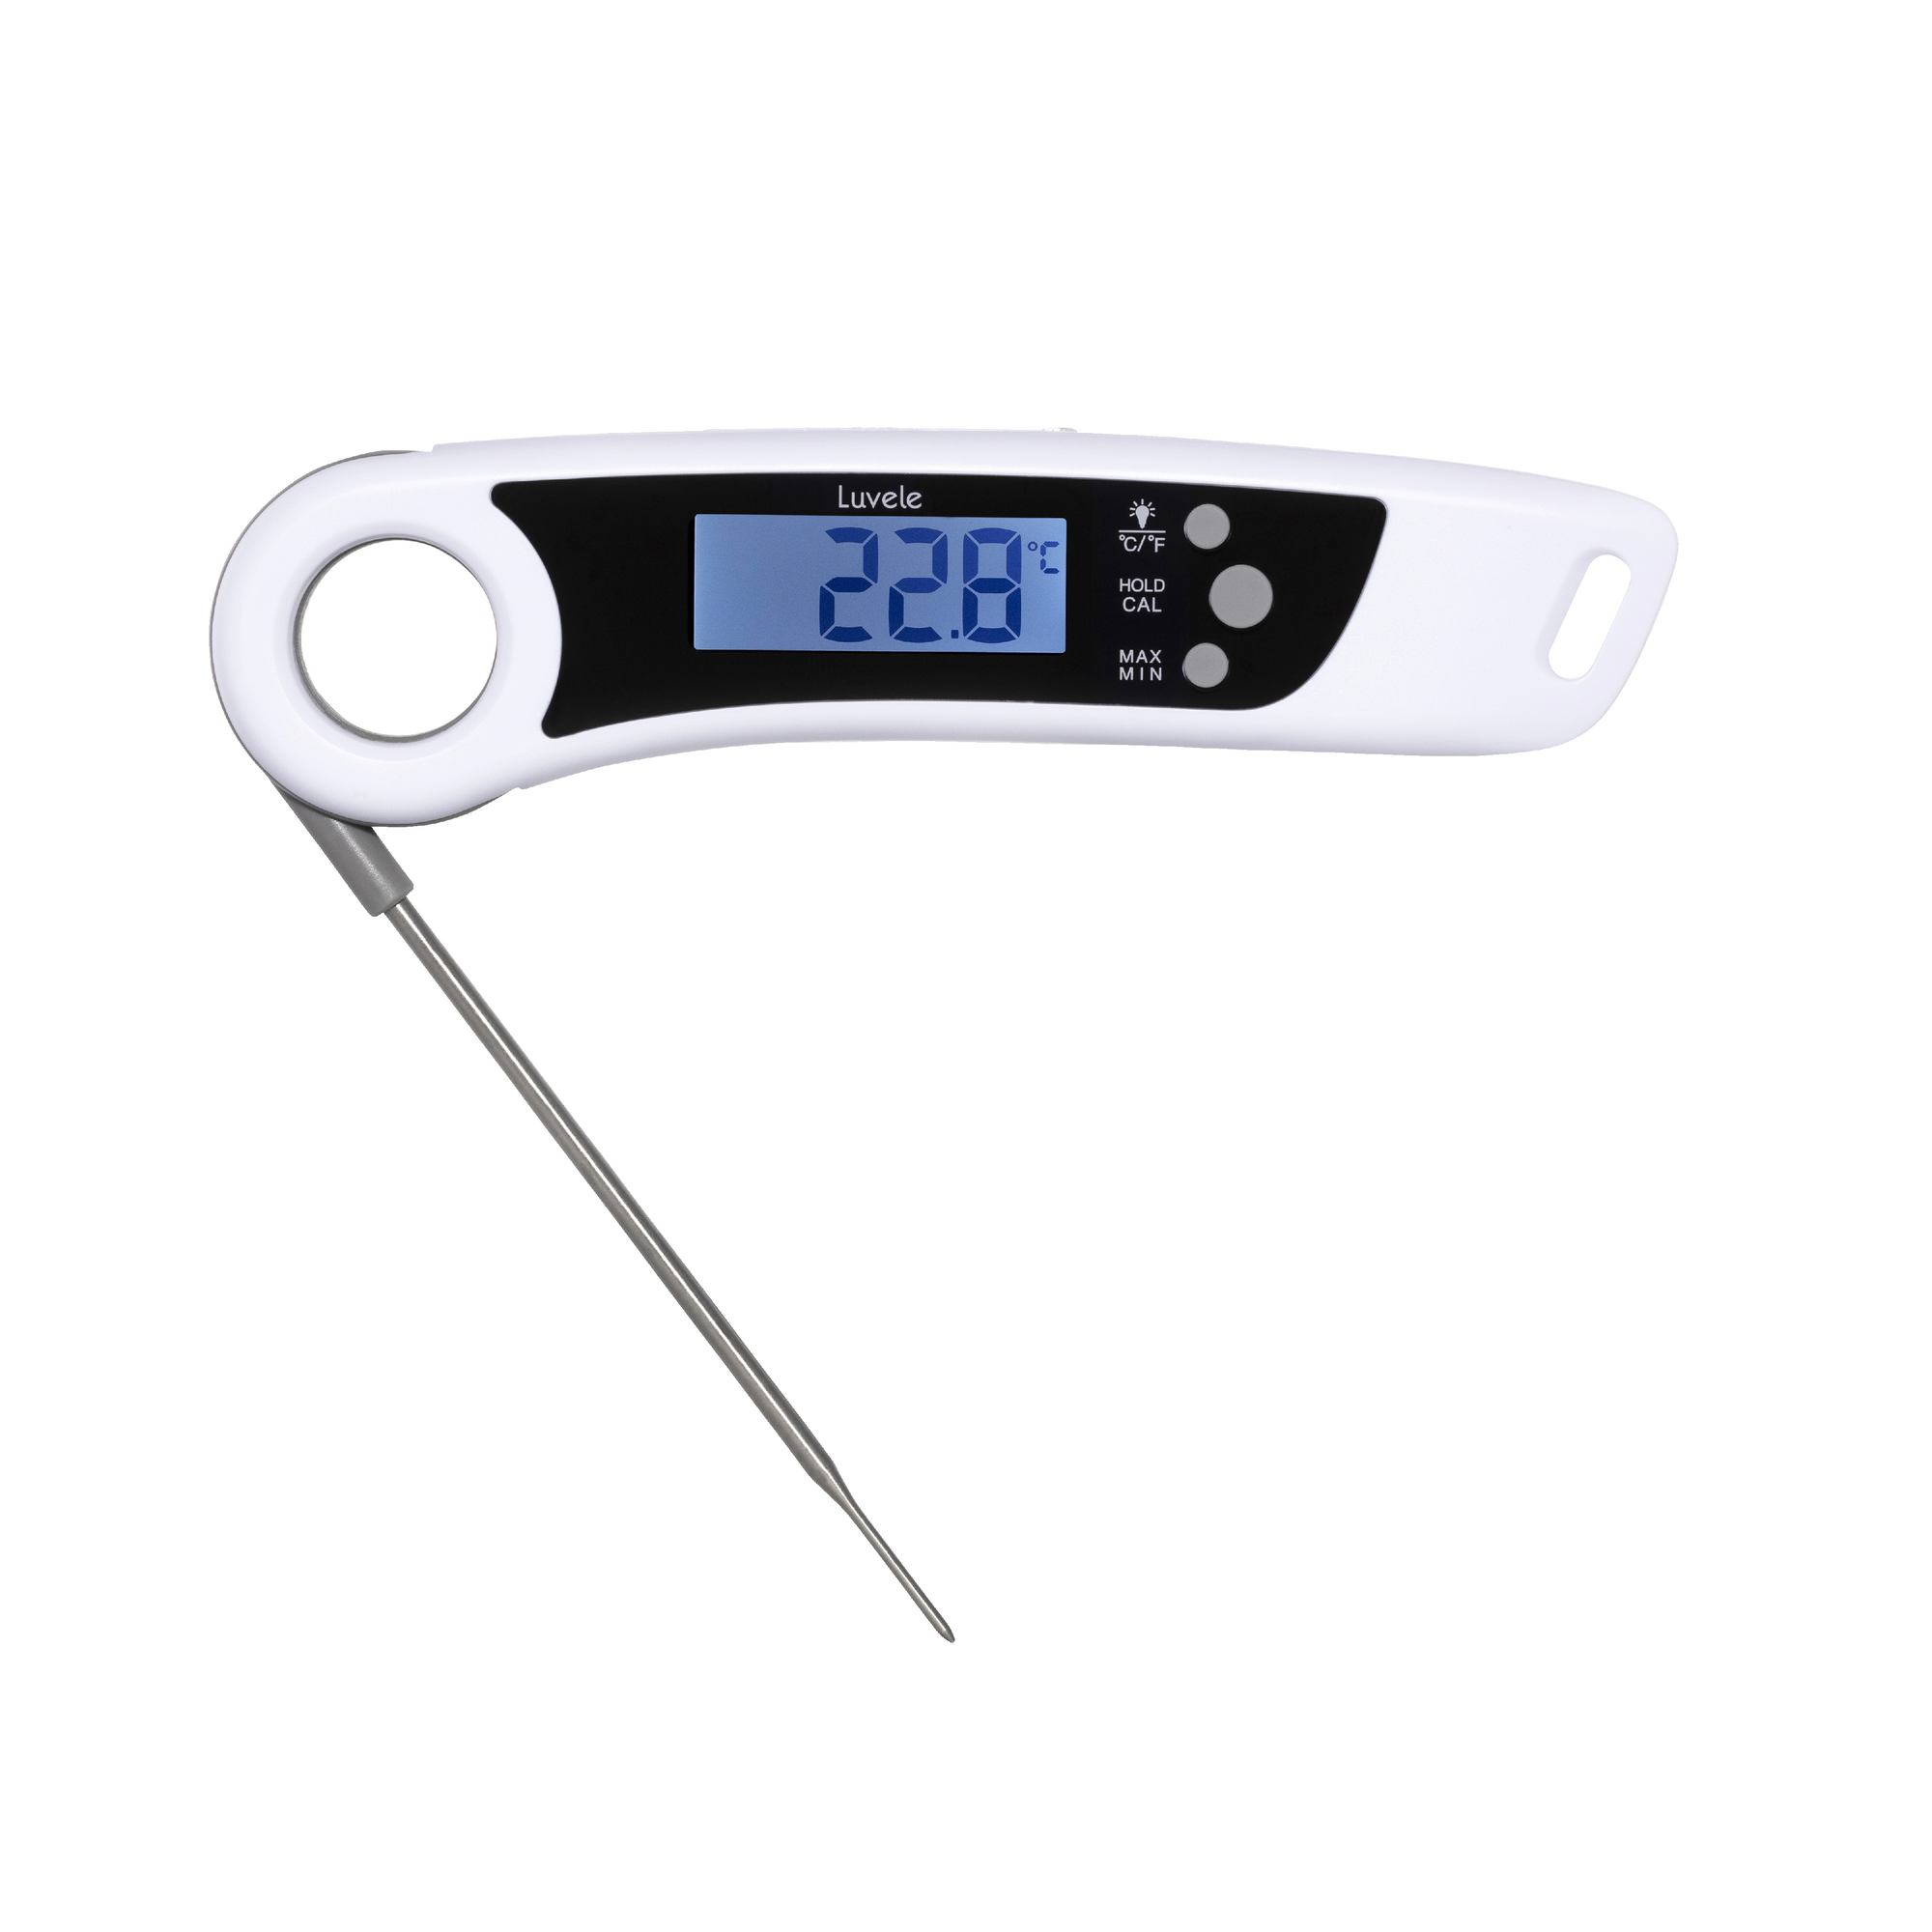 Luvele thermometer